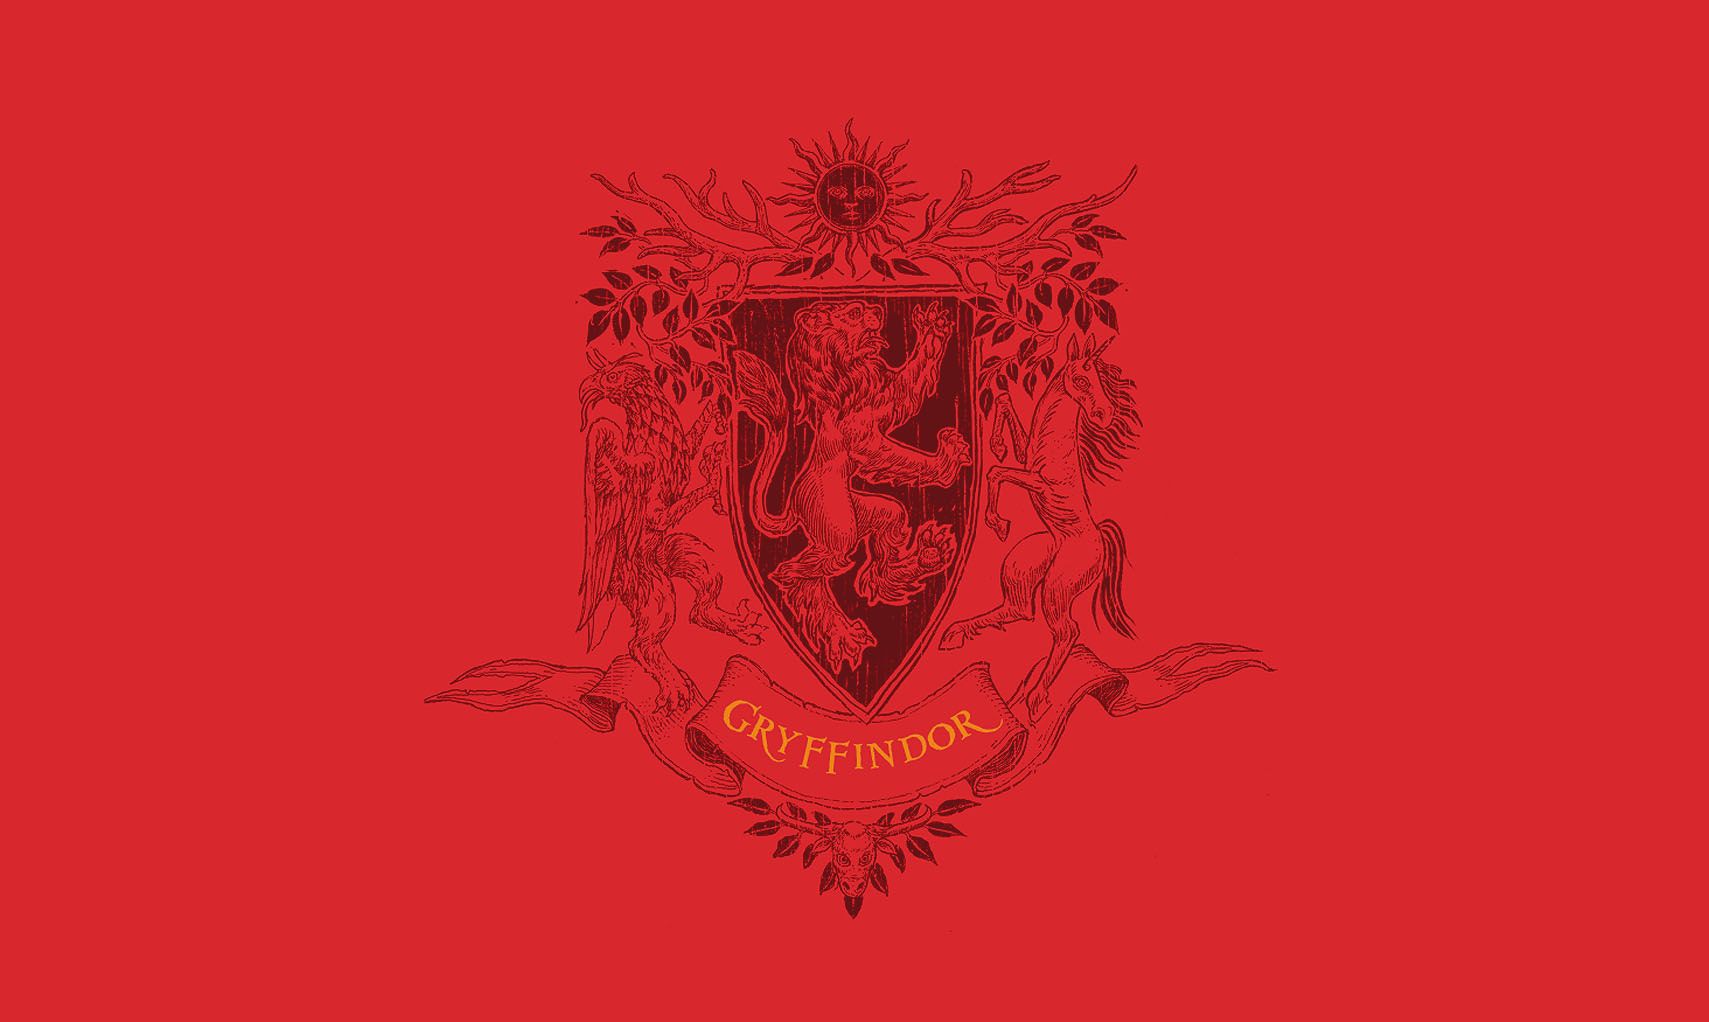 Hogwarts house themed covers unveiled for Philosopher's Stone's